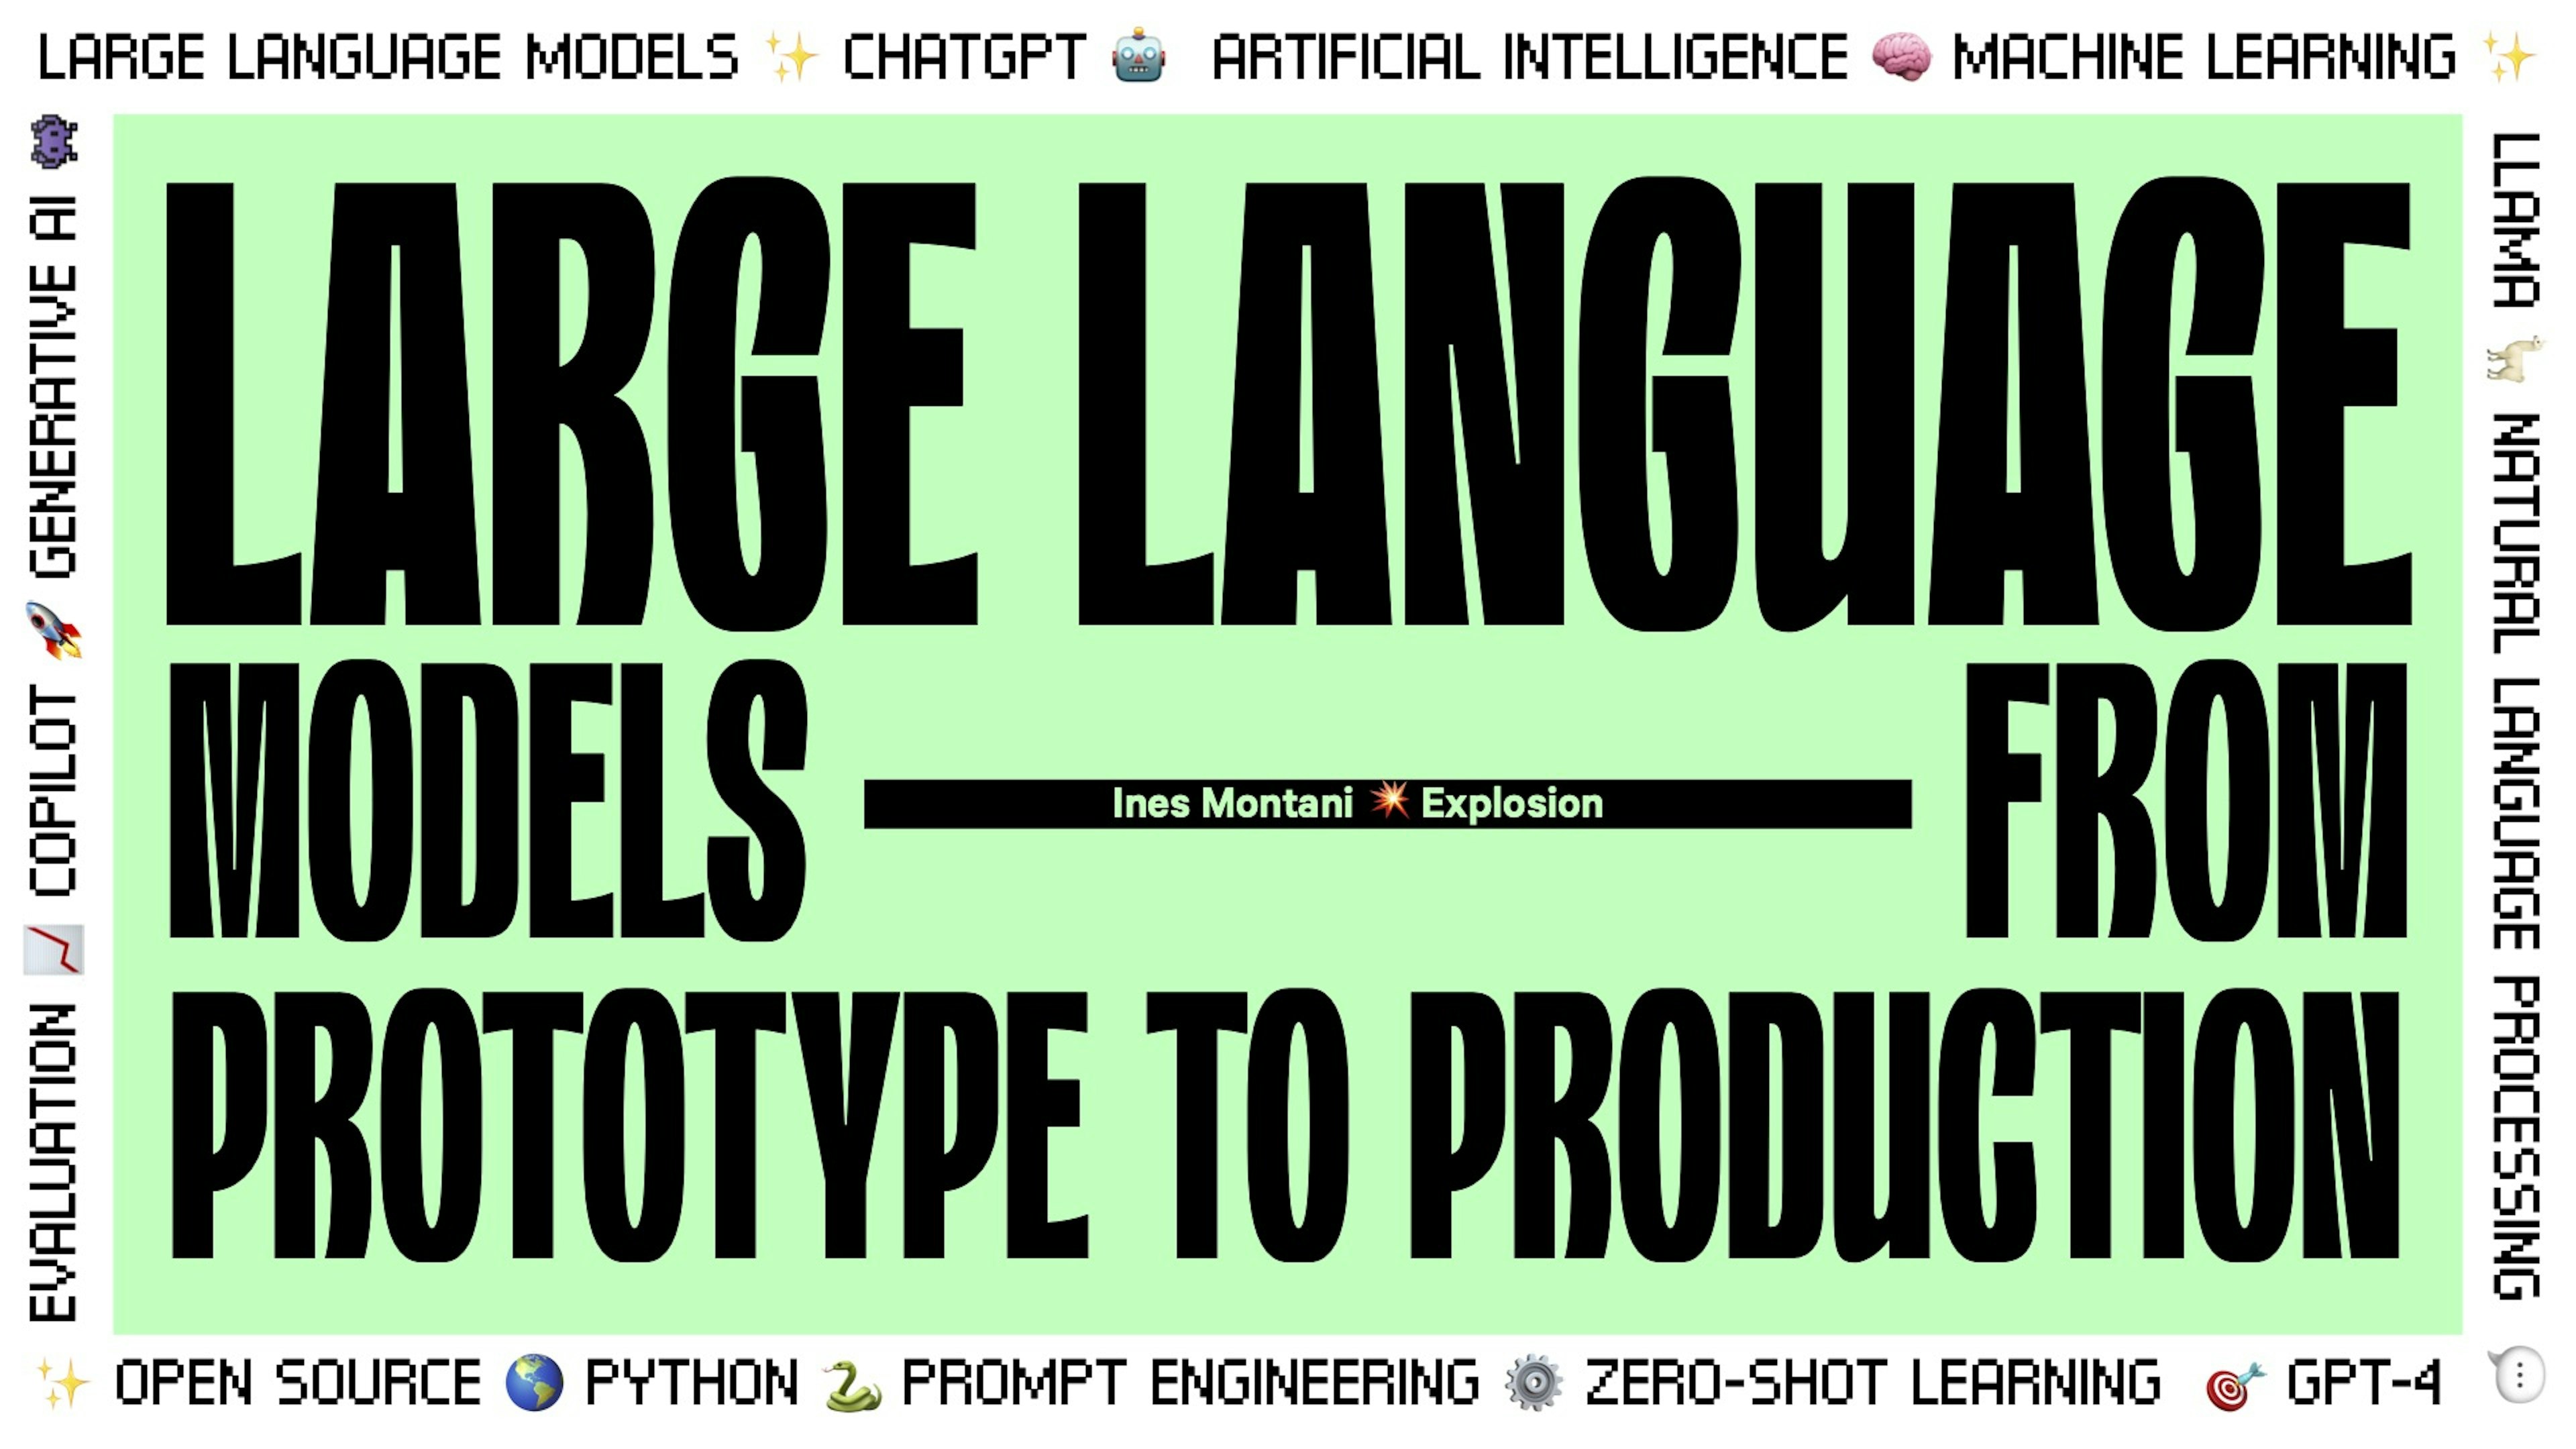 Large Language Models: From Prototype to Production